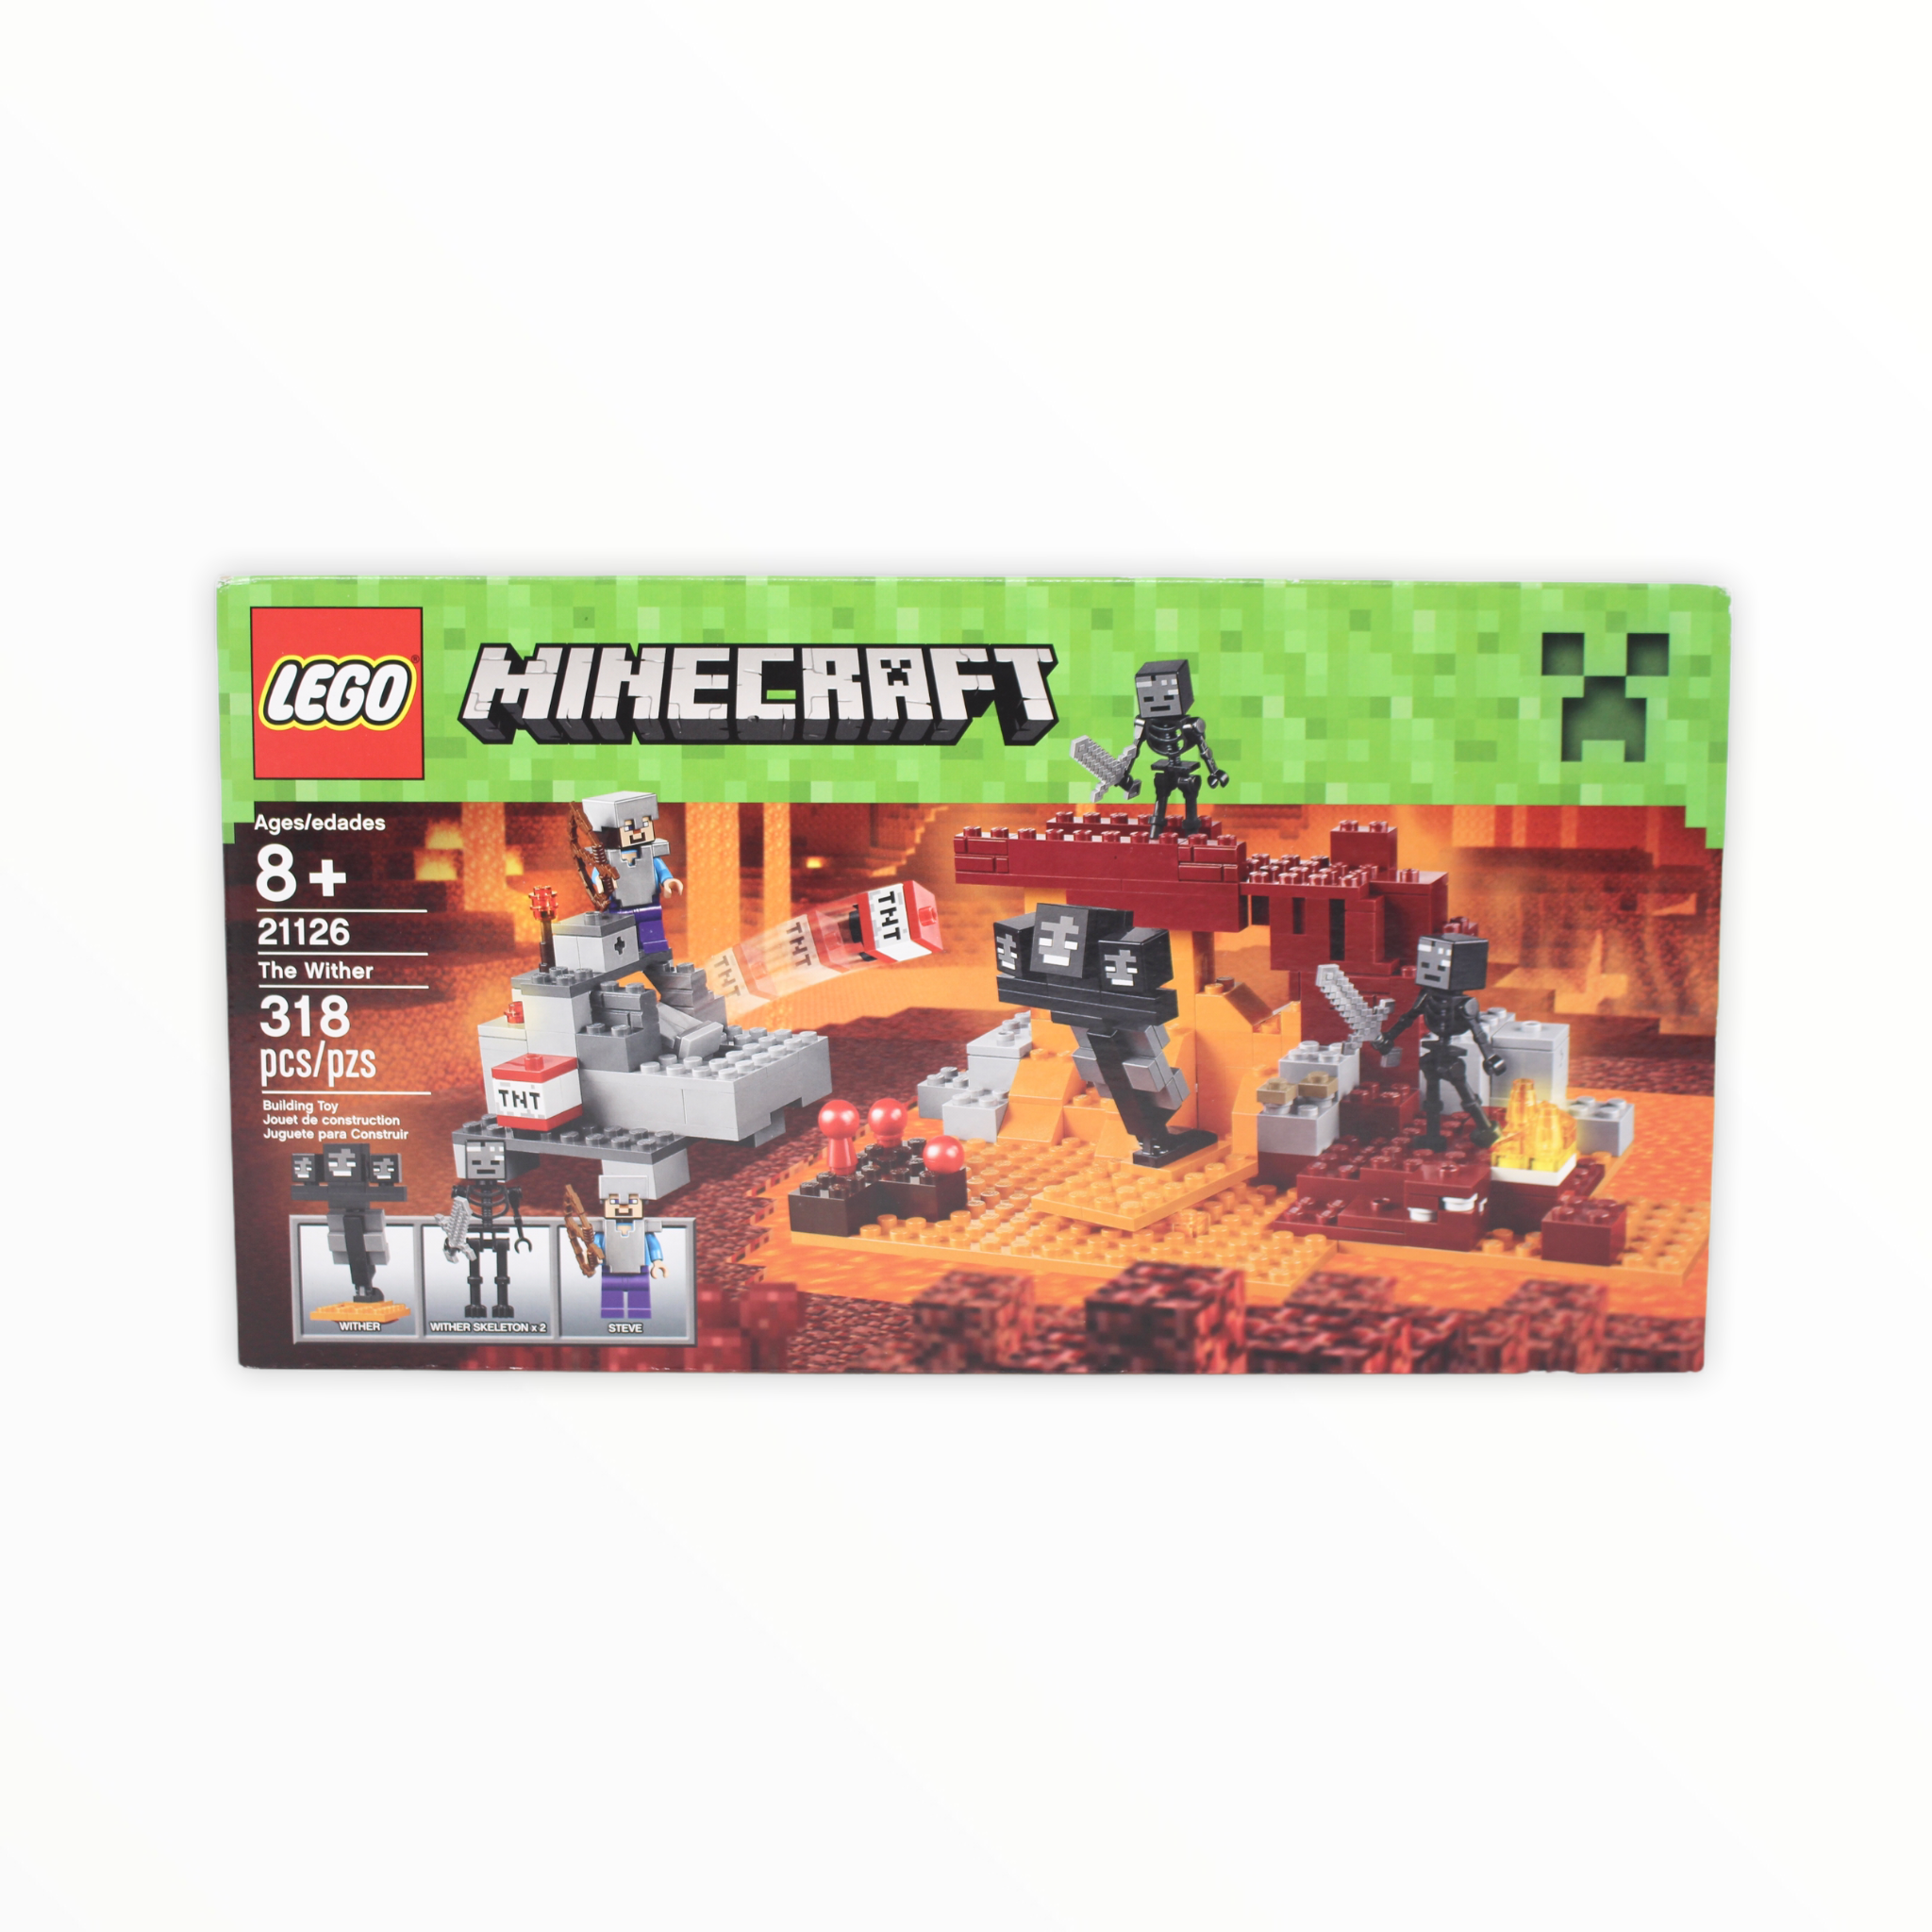 LEGO Minecraft The Wither 21126 